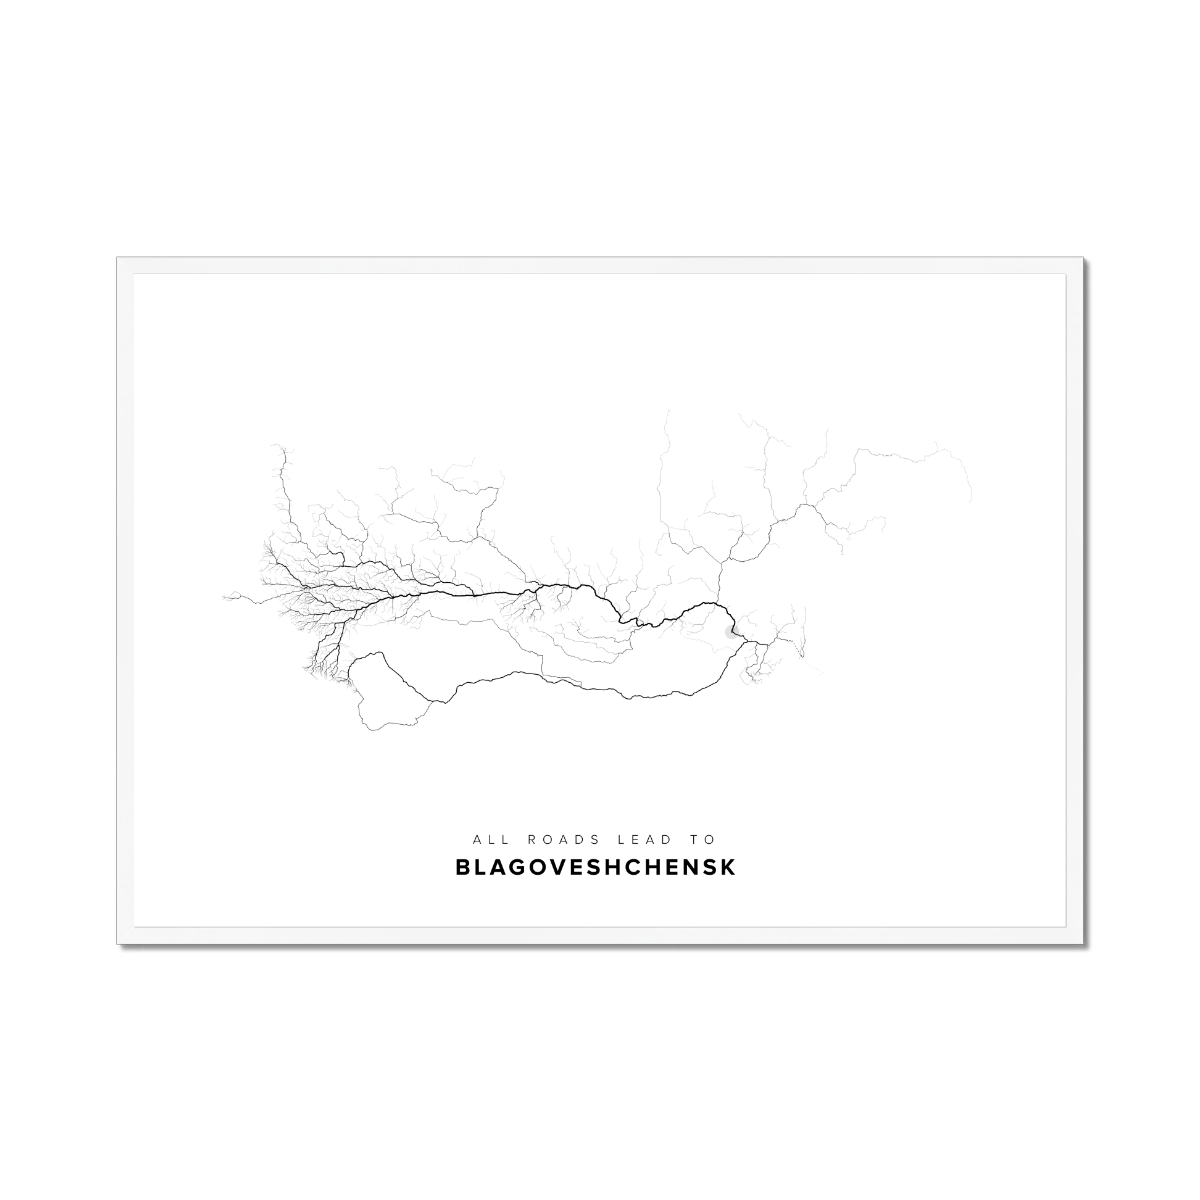 All roads lead to Blagoveshchensk (Russian Federation) Fine Art Map Print